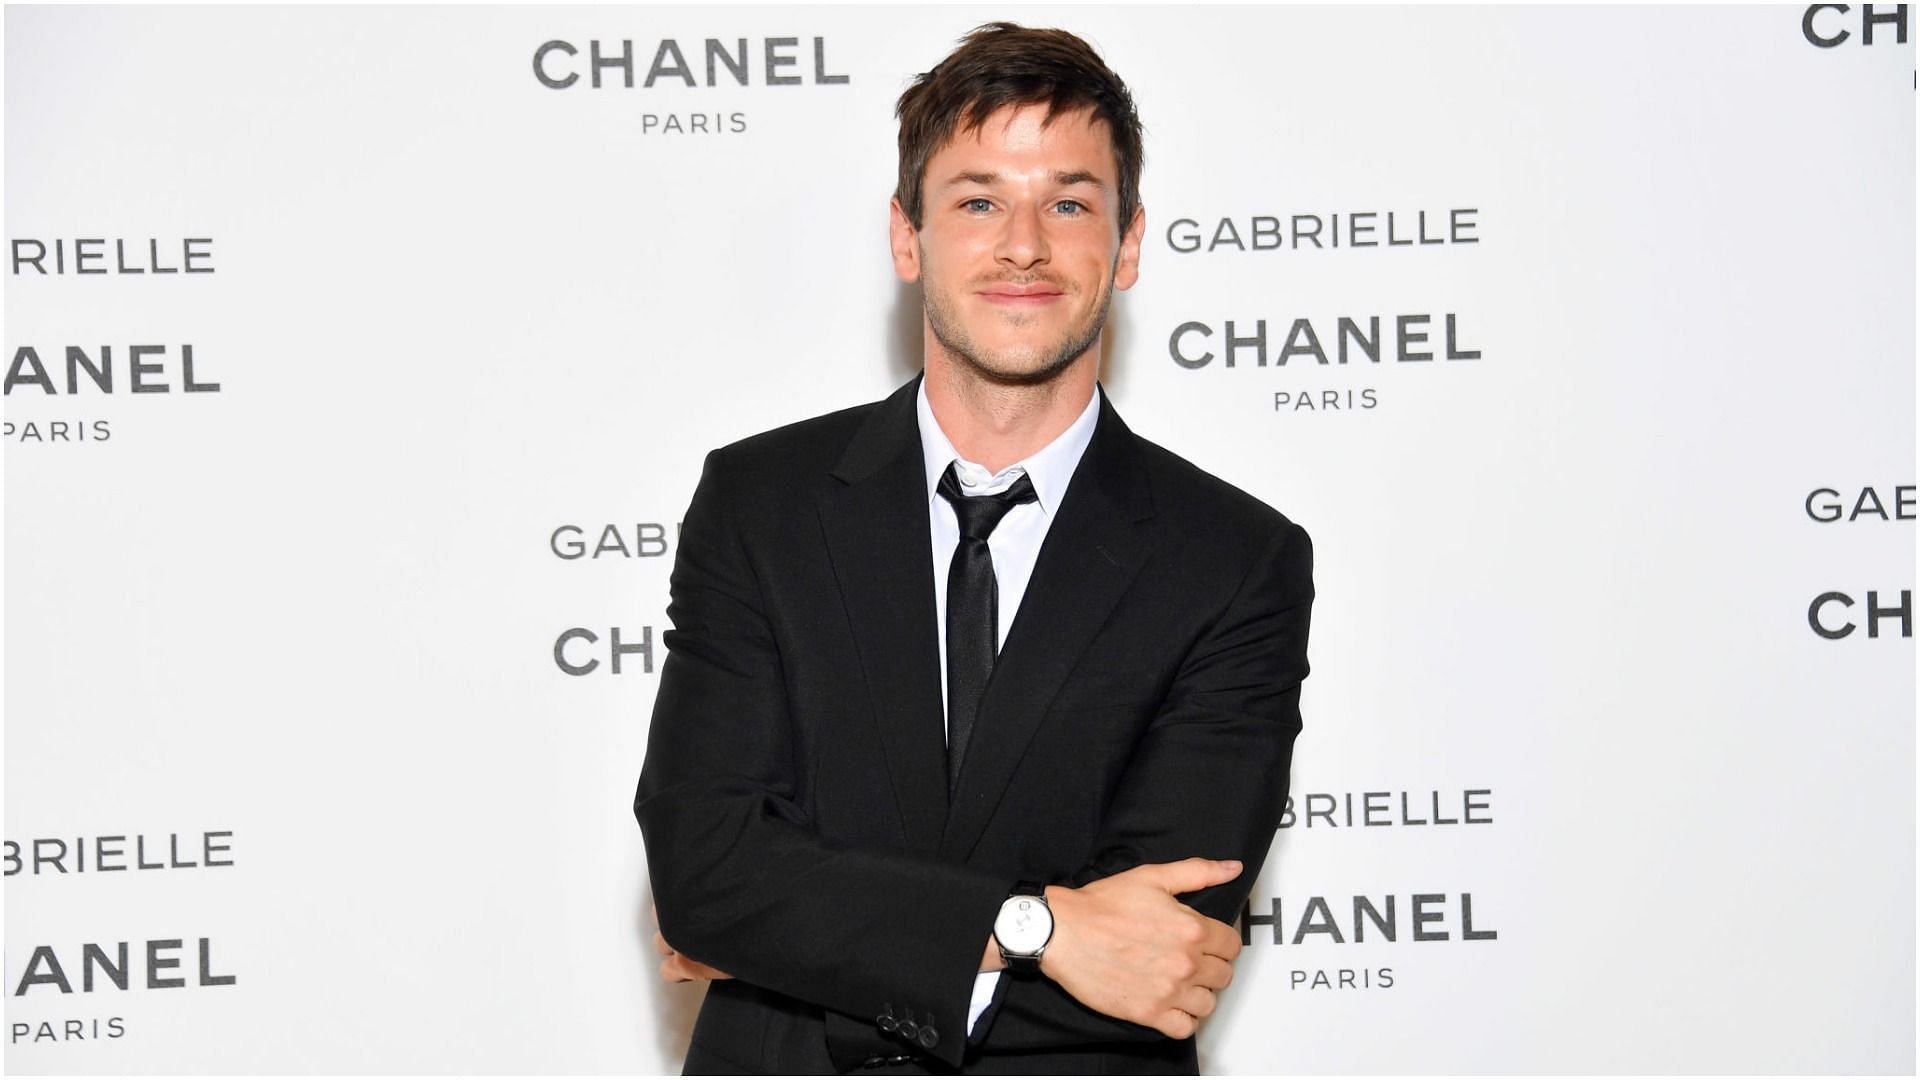 Gaspard Ulliel recently died at the age of 37 (Image via Stephane Cardinale/Getty Images)